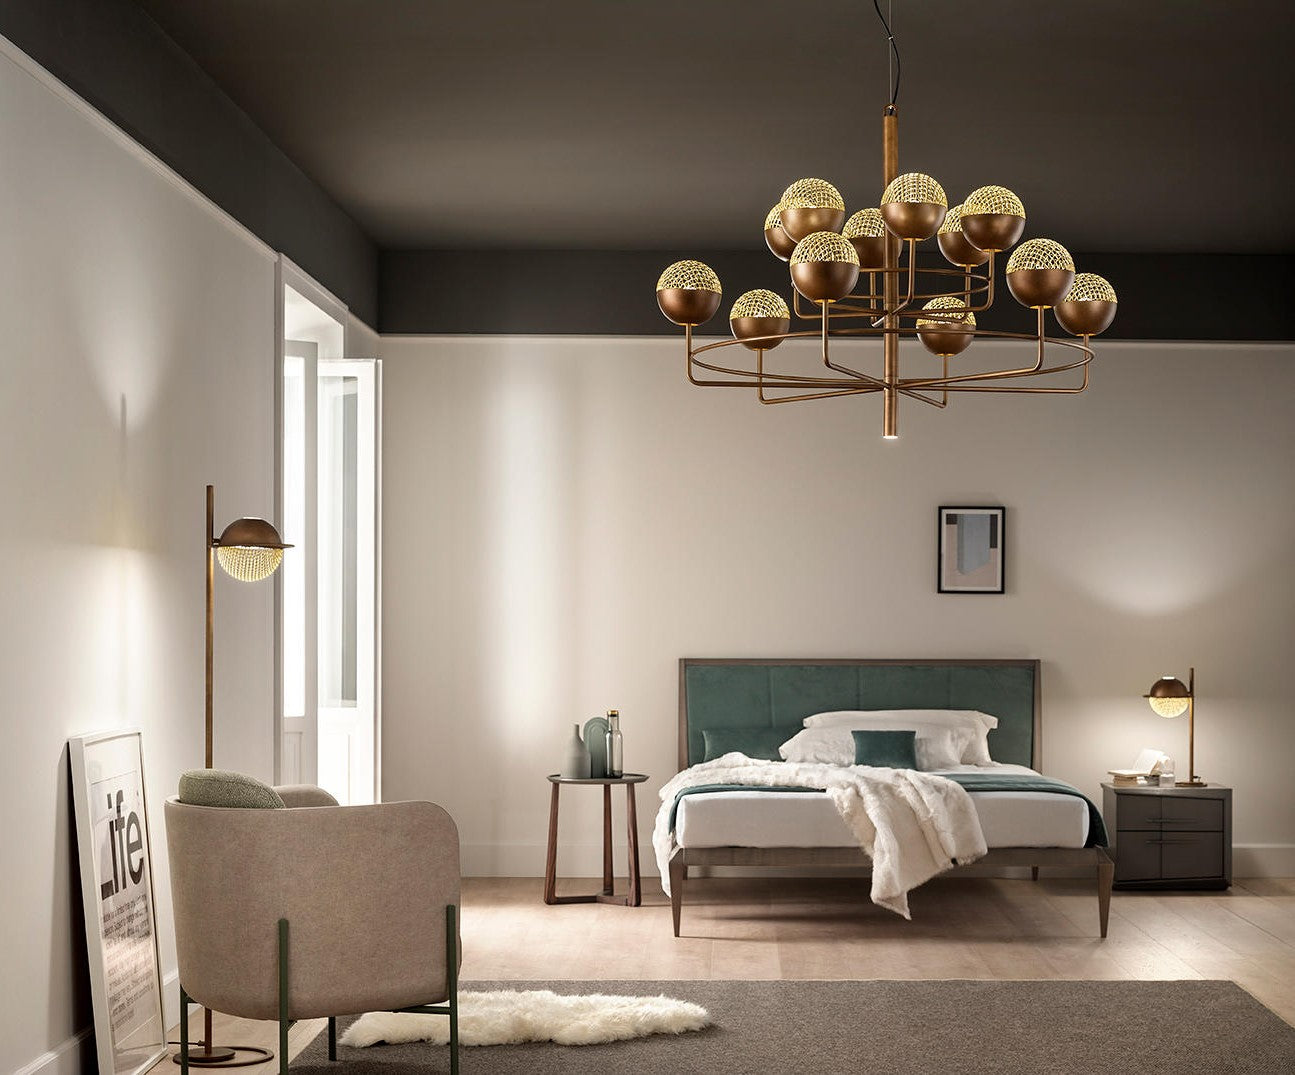 Iglu Luxury Chandelier from Masiero, Italy in a Bedroom warm interior with the floor lamp available at Spacio India for luxury home decor collection of Decorative Lighting